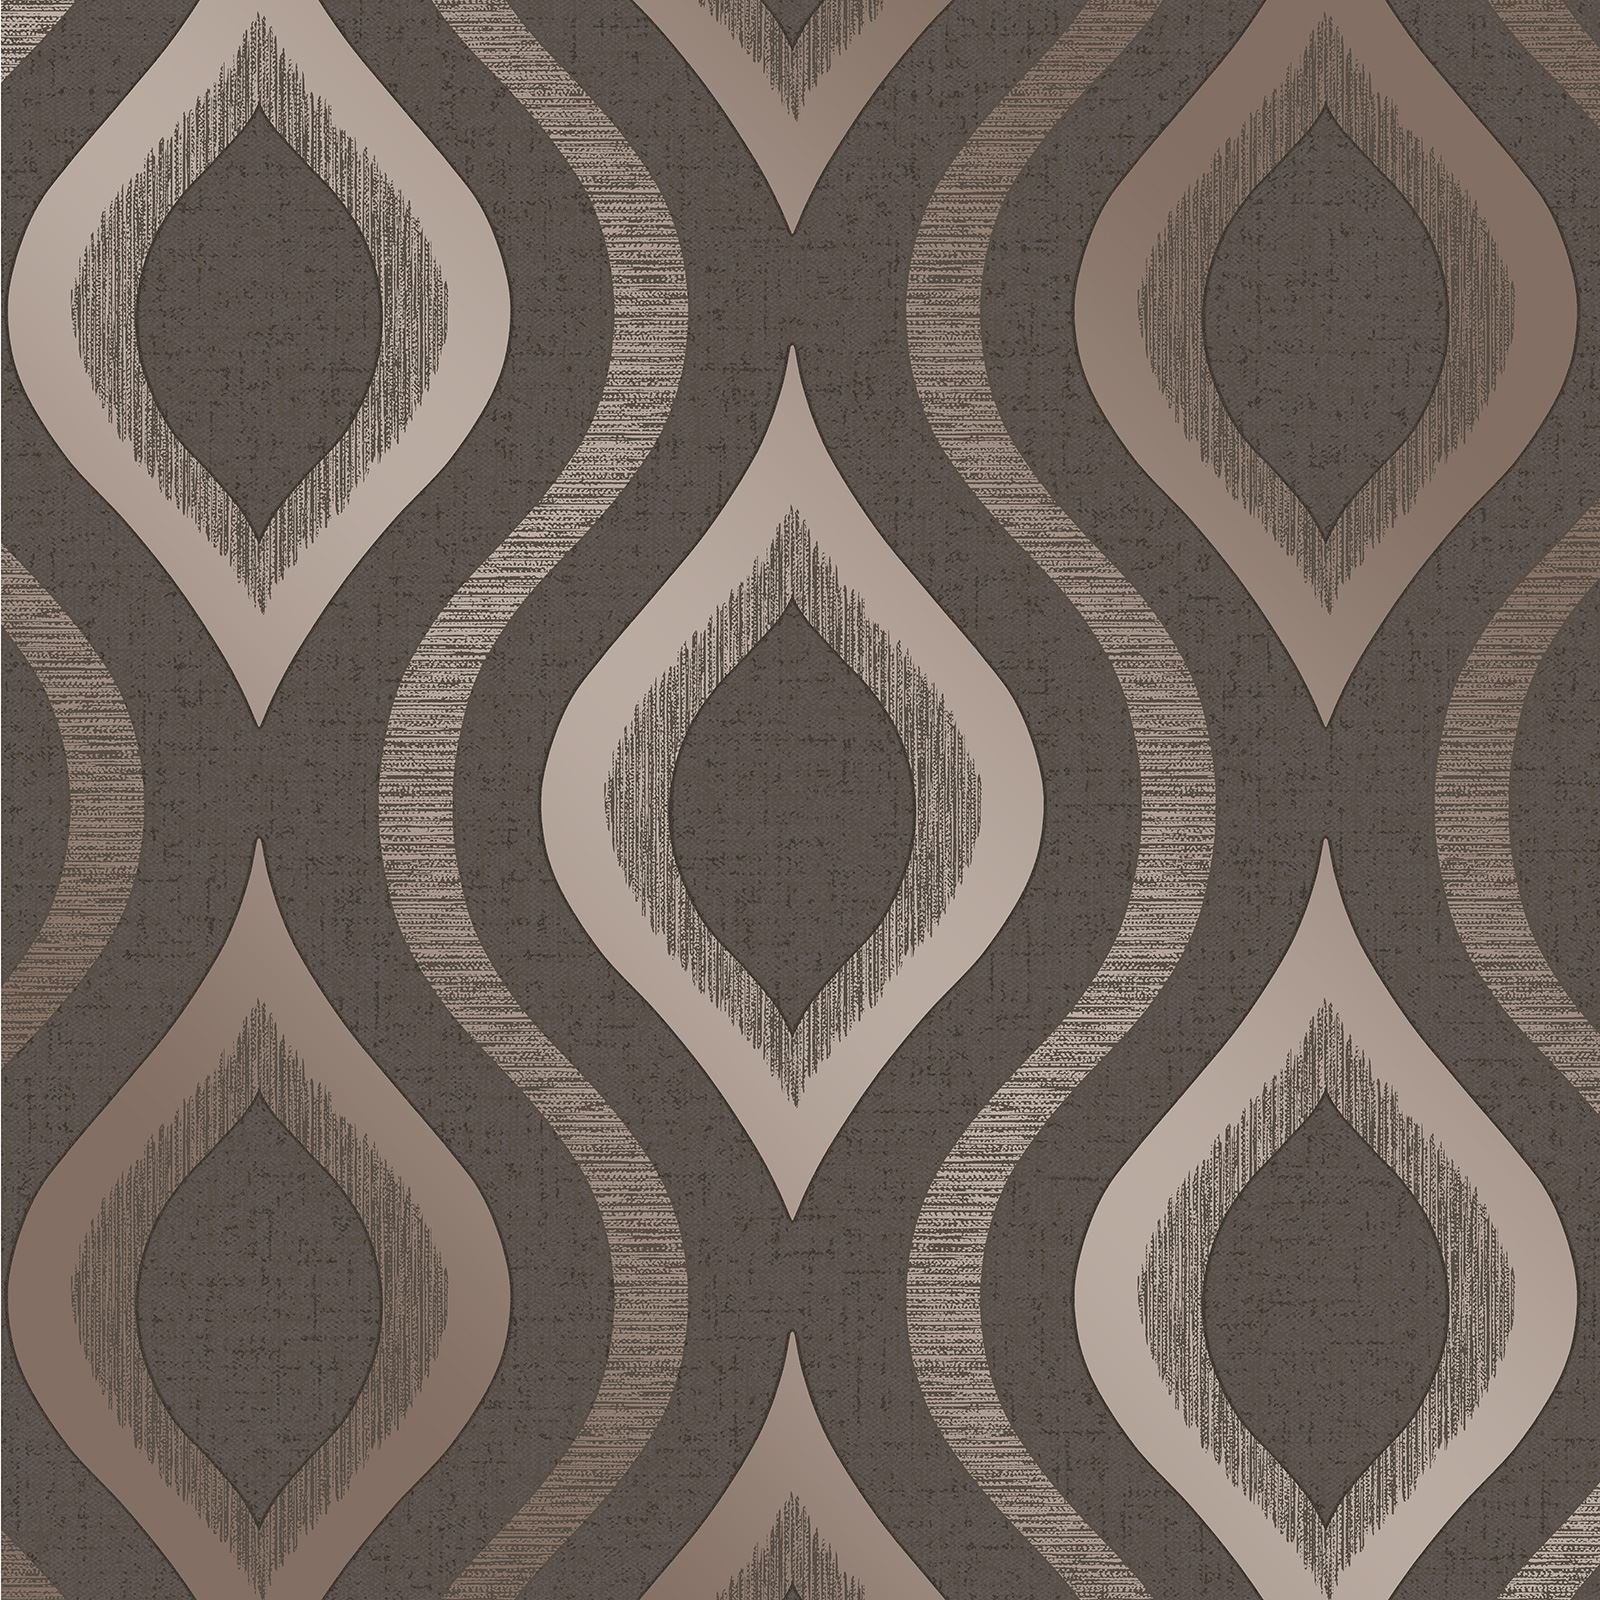 gold and silver wallpaper,pattern,brown,wallpaper,design,rug